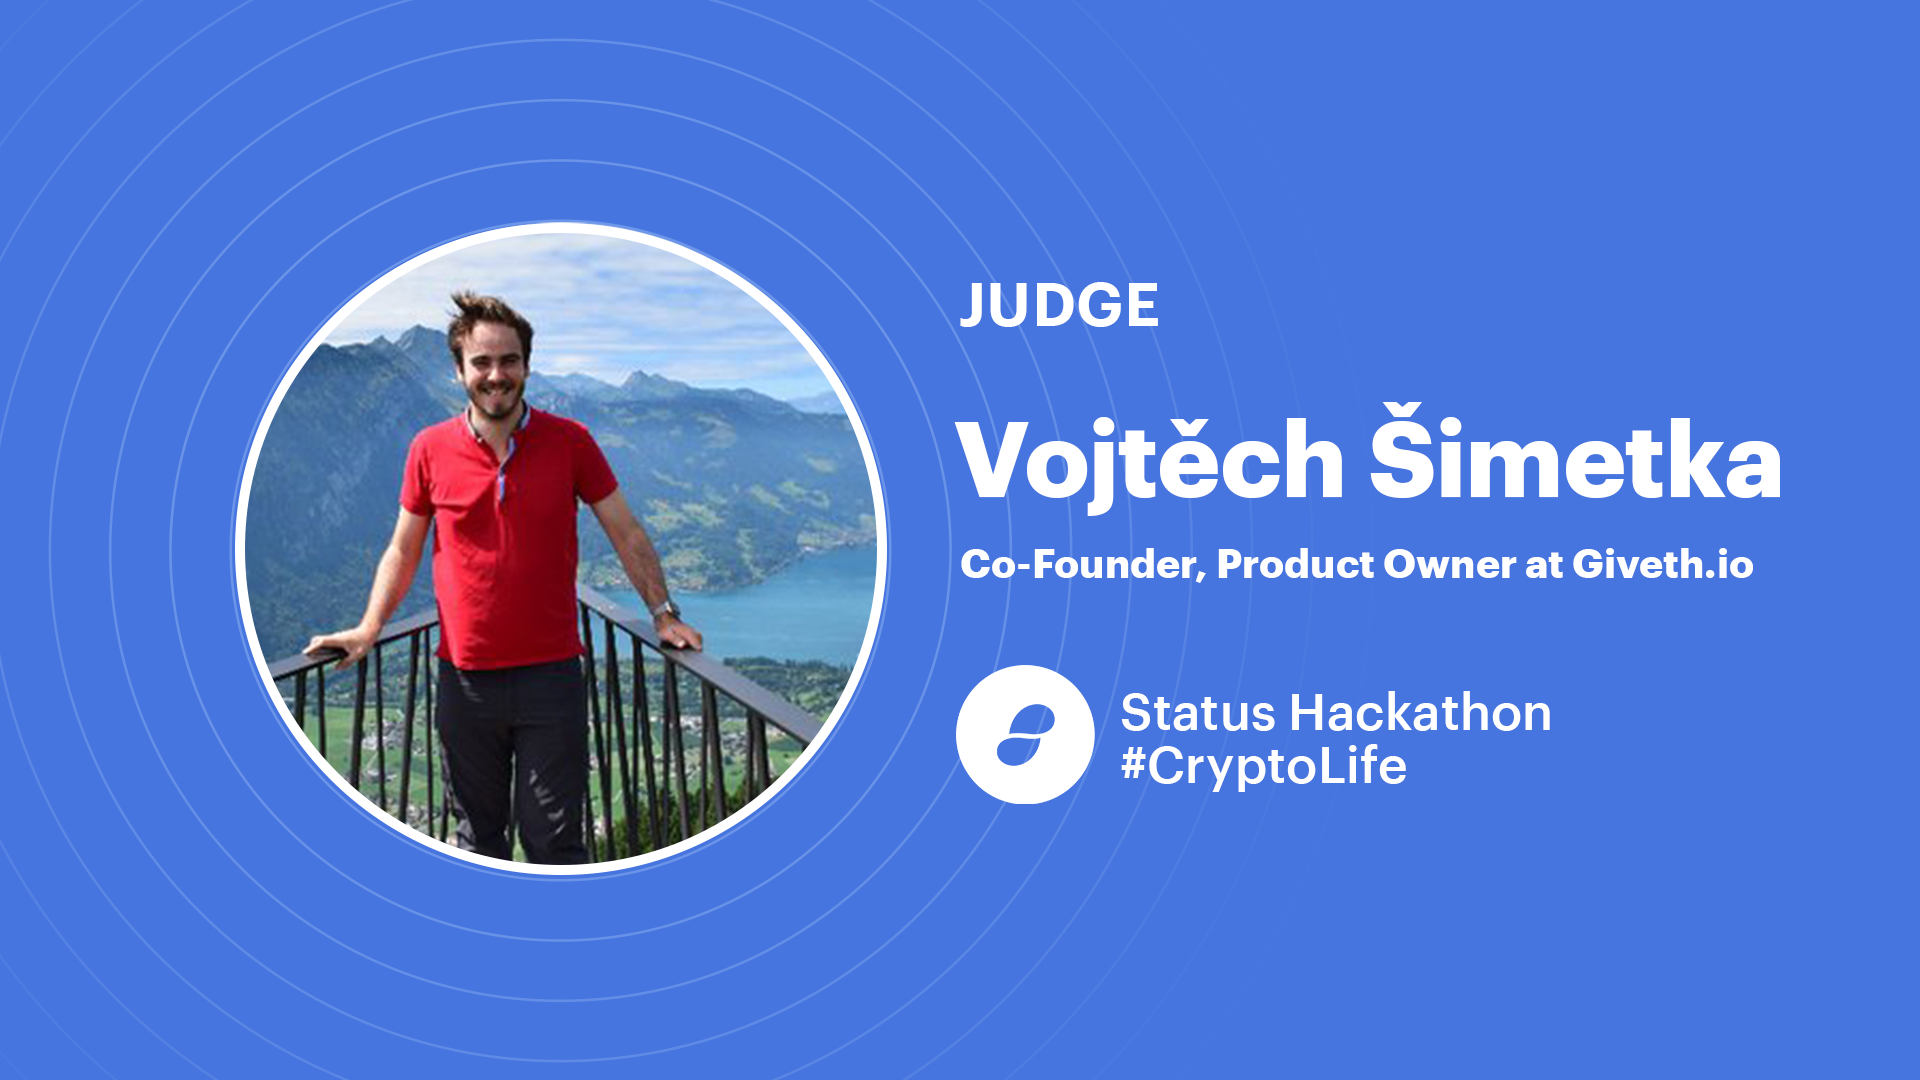 Giveth co-founder, Vojtech Simetka joins as a judge for the Status Hackathon